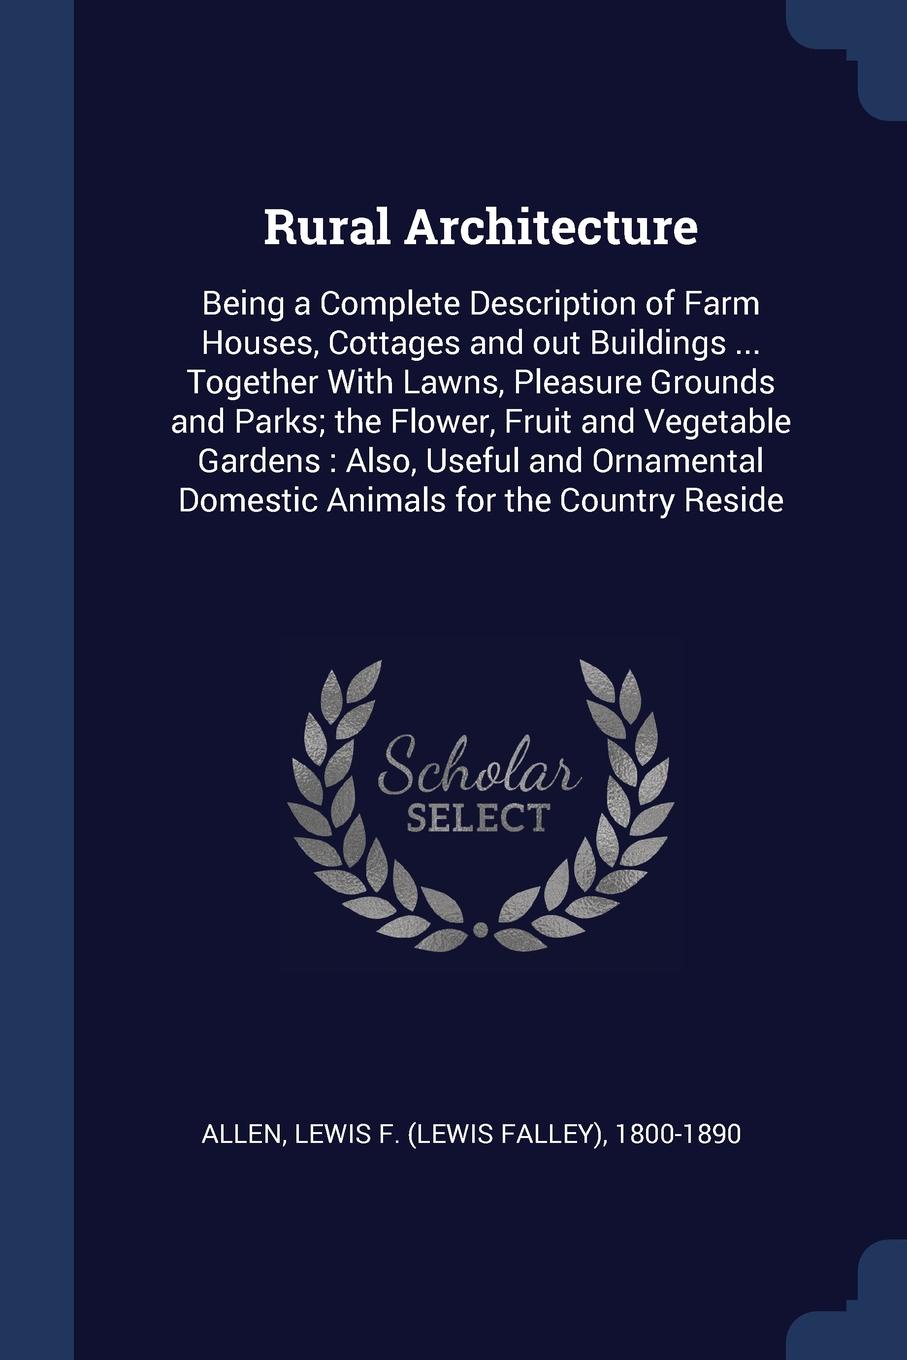 Rural Architecture. Being a Complete Description of Farm Houses, Cottages and out Buildings ... Together With Lawns, Pleasure Grounds and Parks; the Flower, Fruit and Vegetable Gardens : Also, Useful and Ornamental Domestic Animals for the Country...